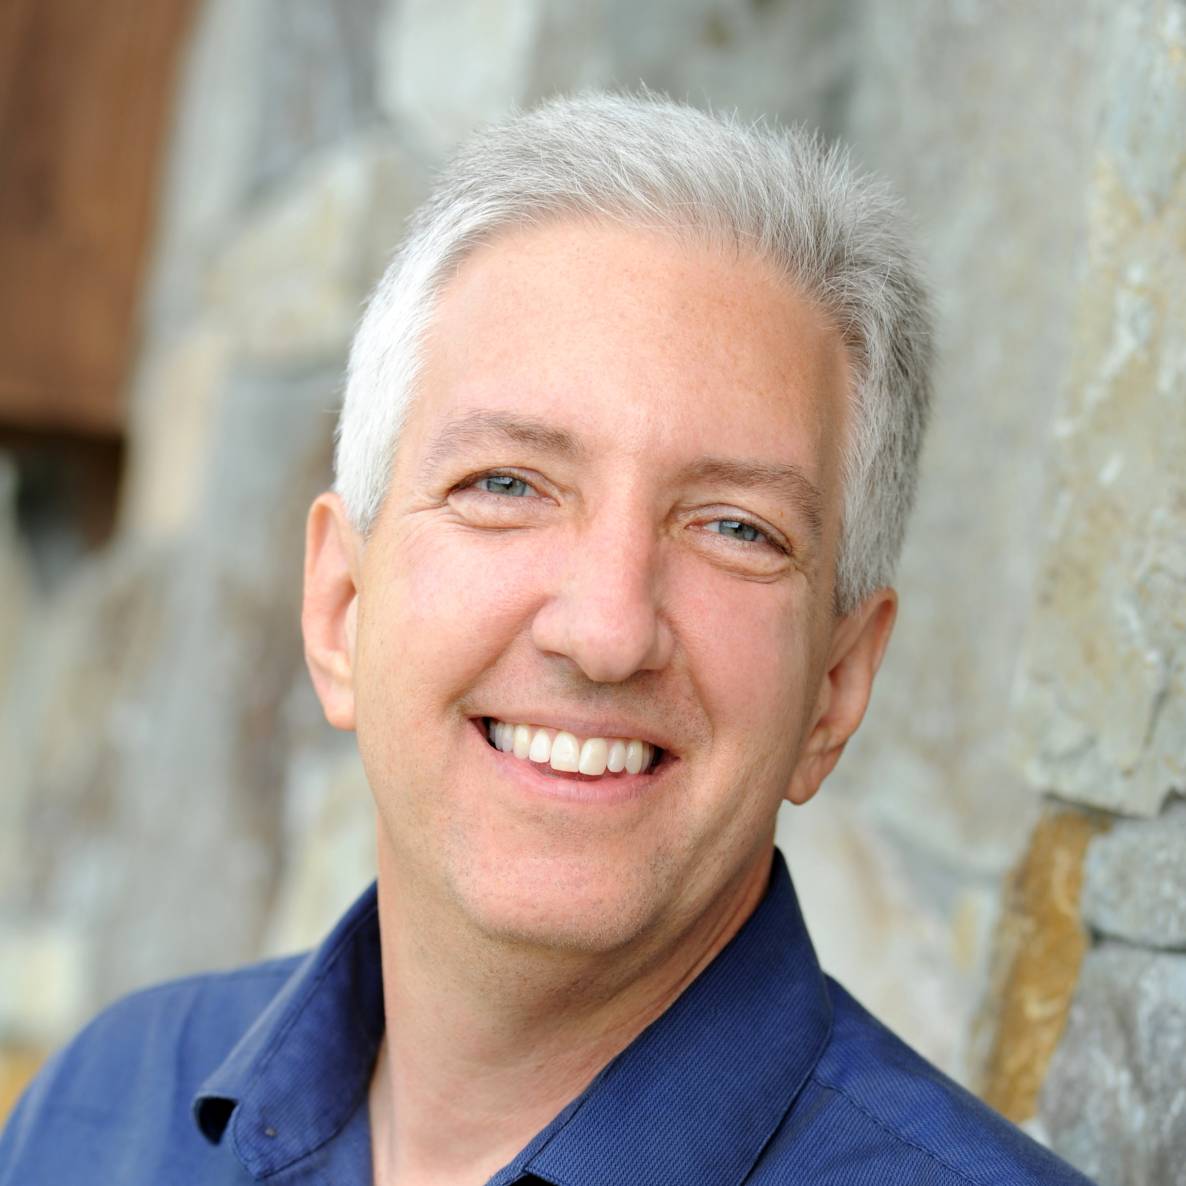 smiling-farallon-employee-with-short-gray-hair-and-blue-shirt